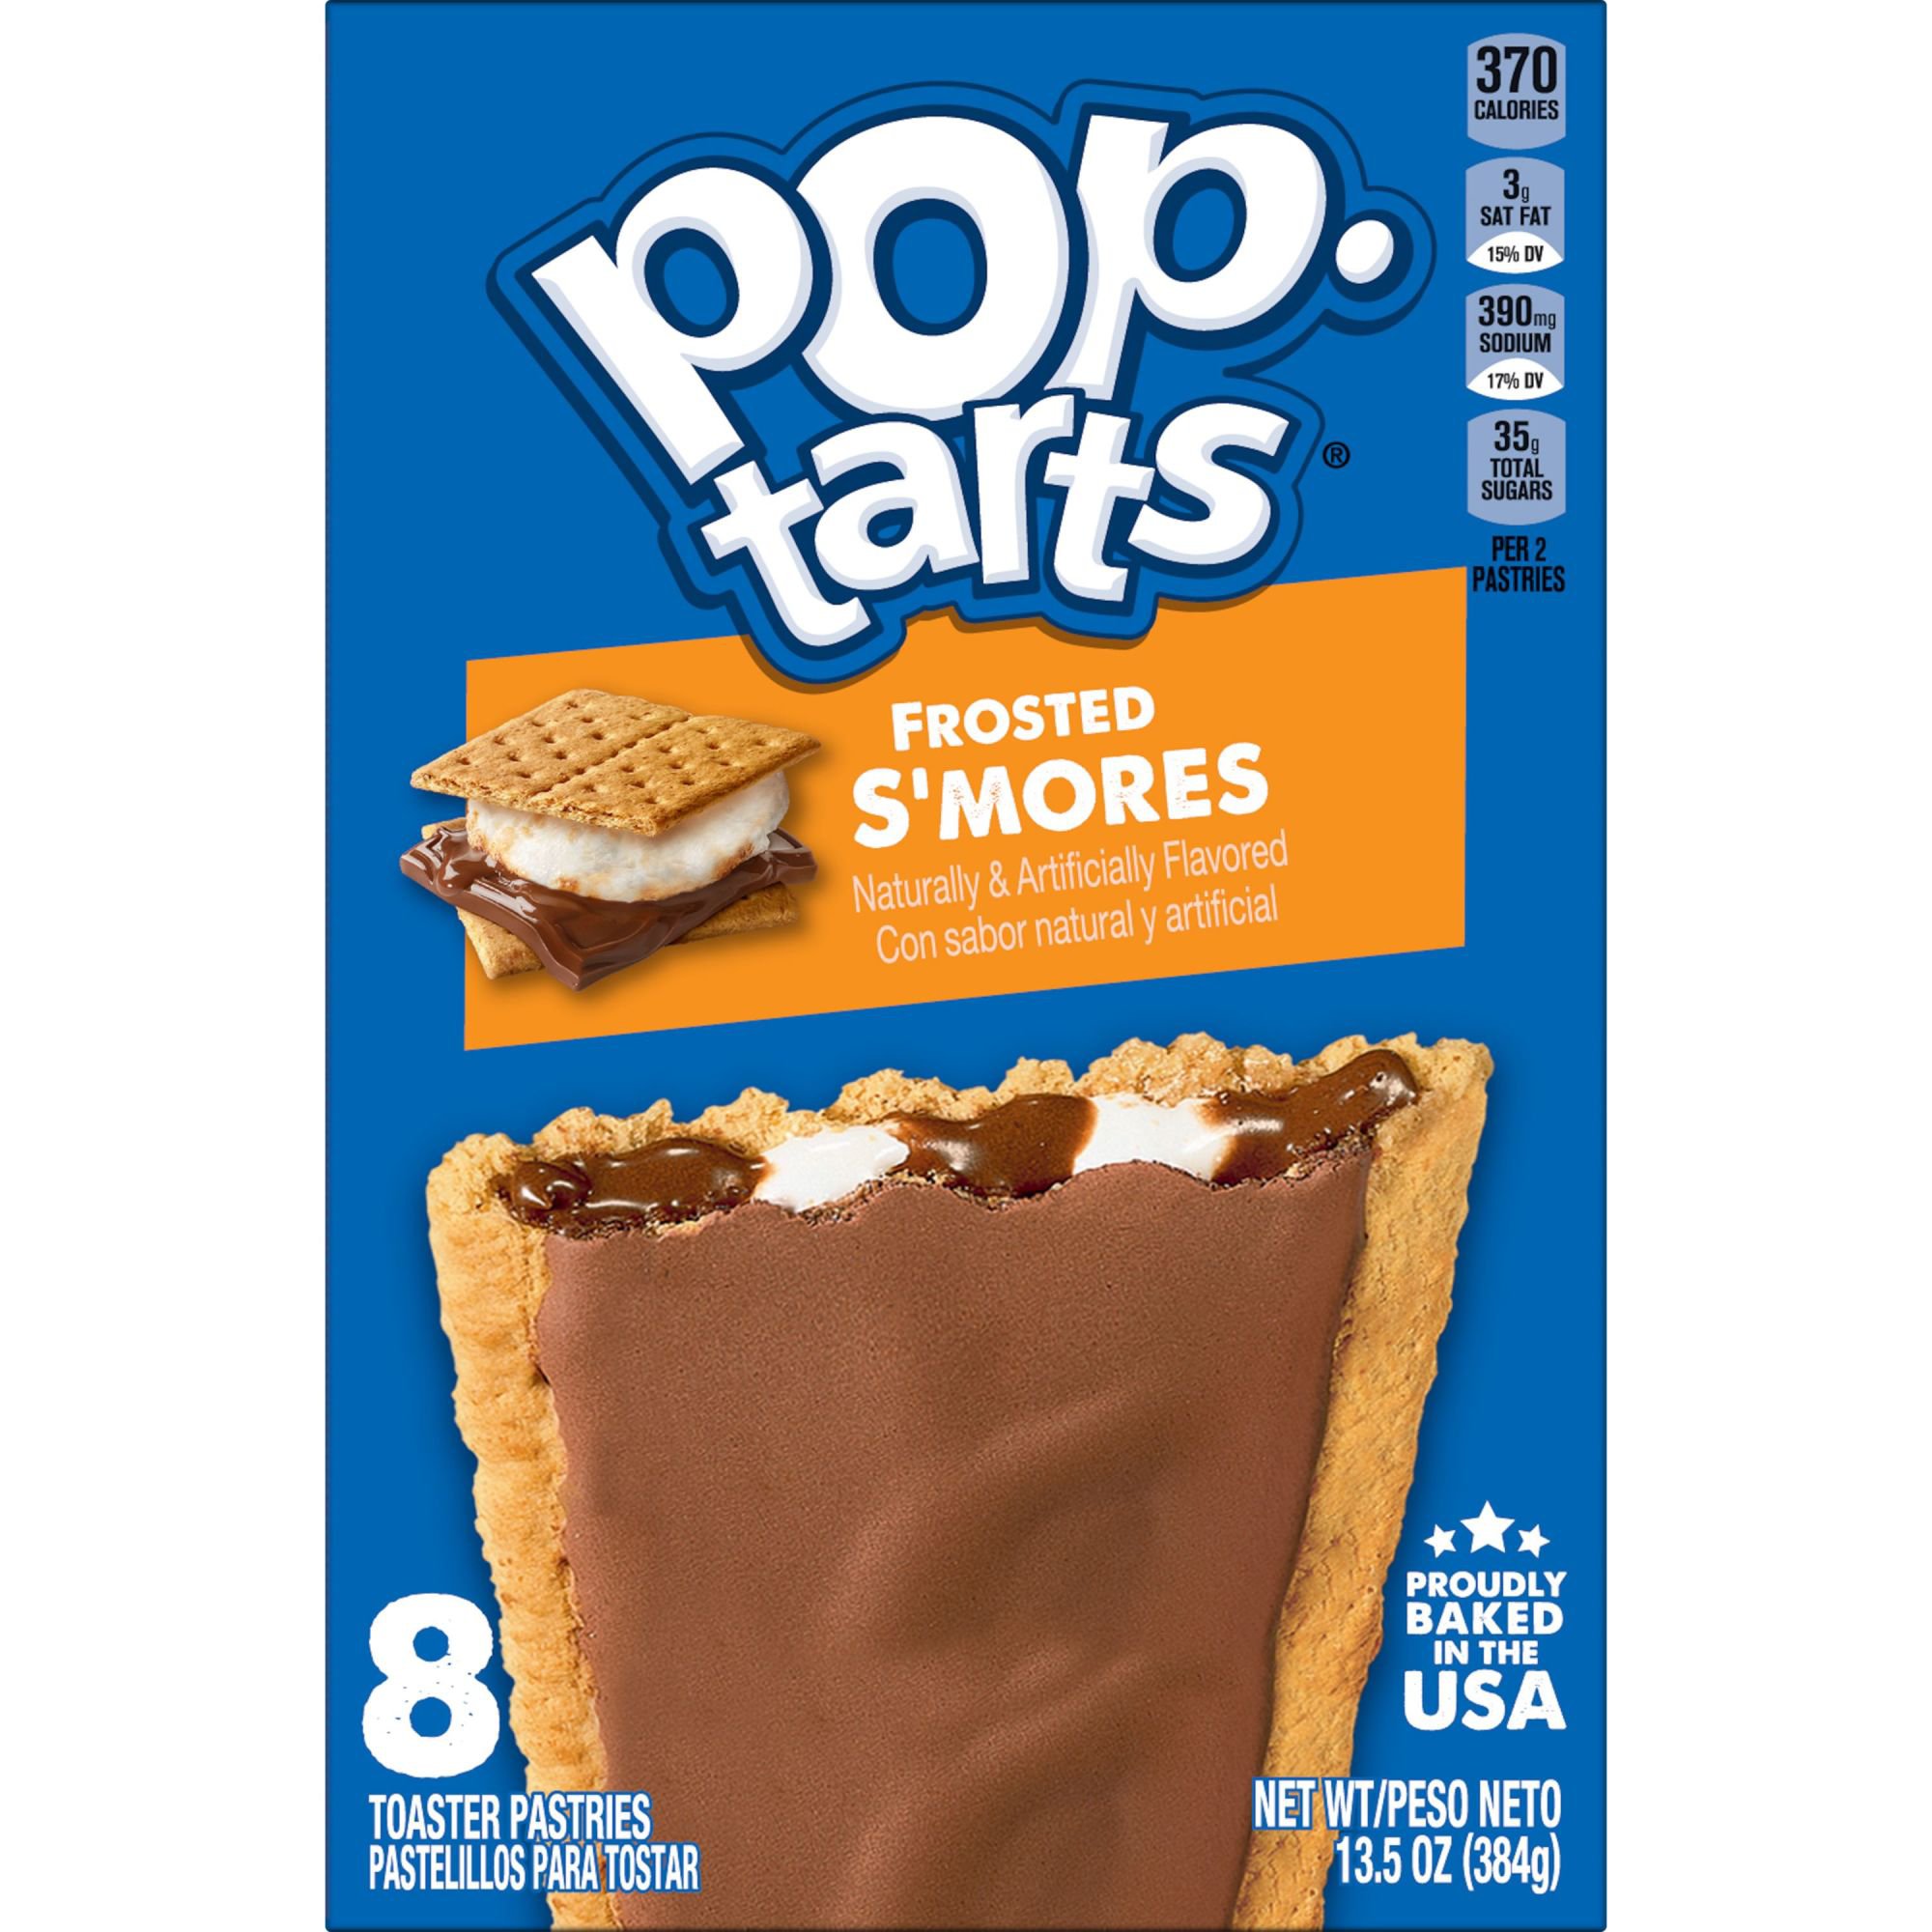 Pop Tarts Frosted S Mores Toaster Pastries Shop Toaster Pastries At H E B